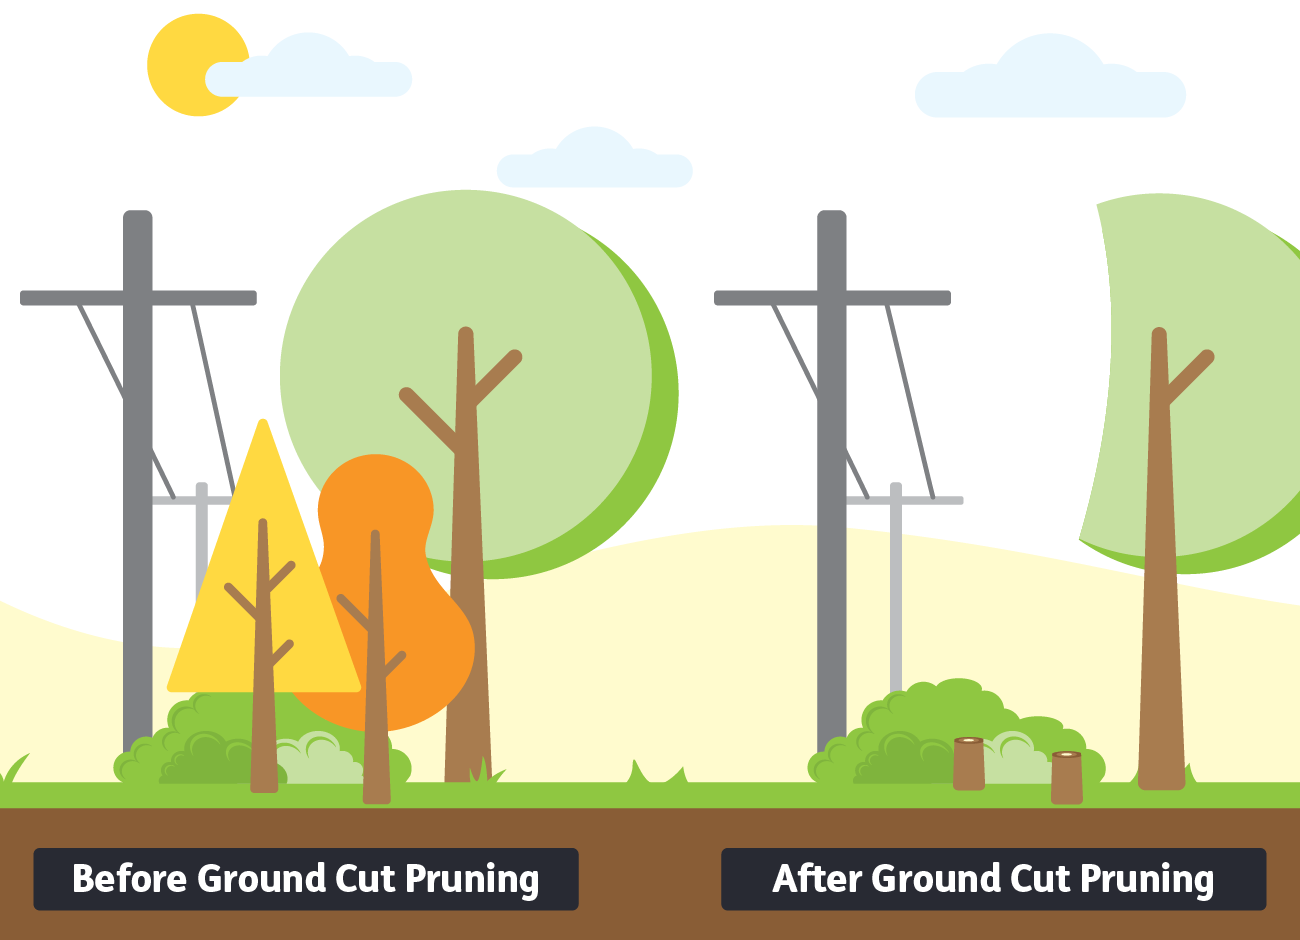 Graphic depicting ground cut pruning technique